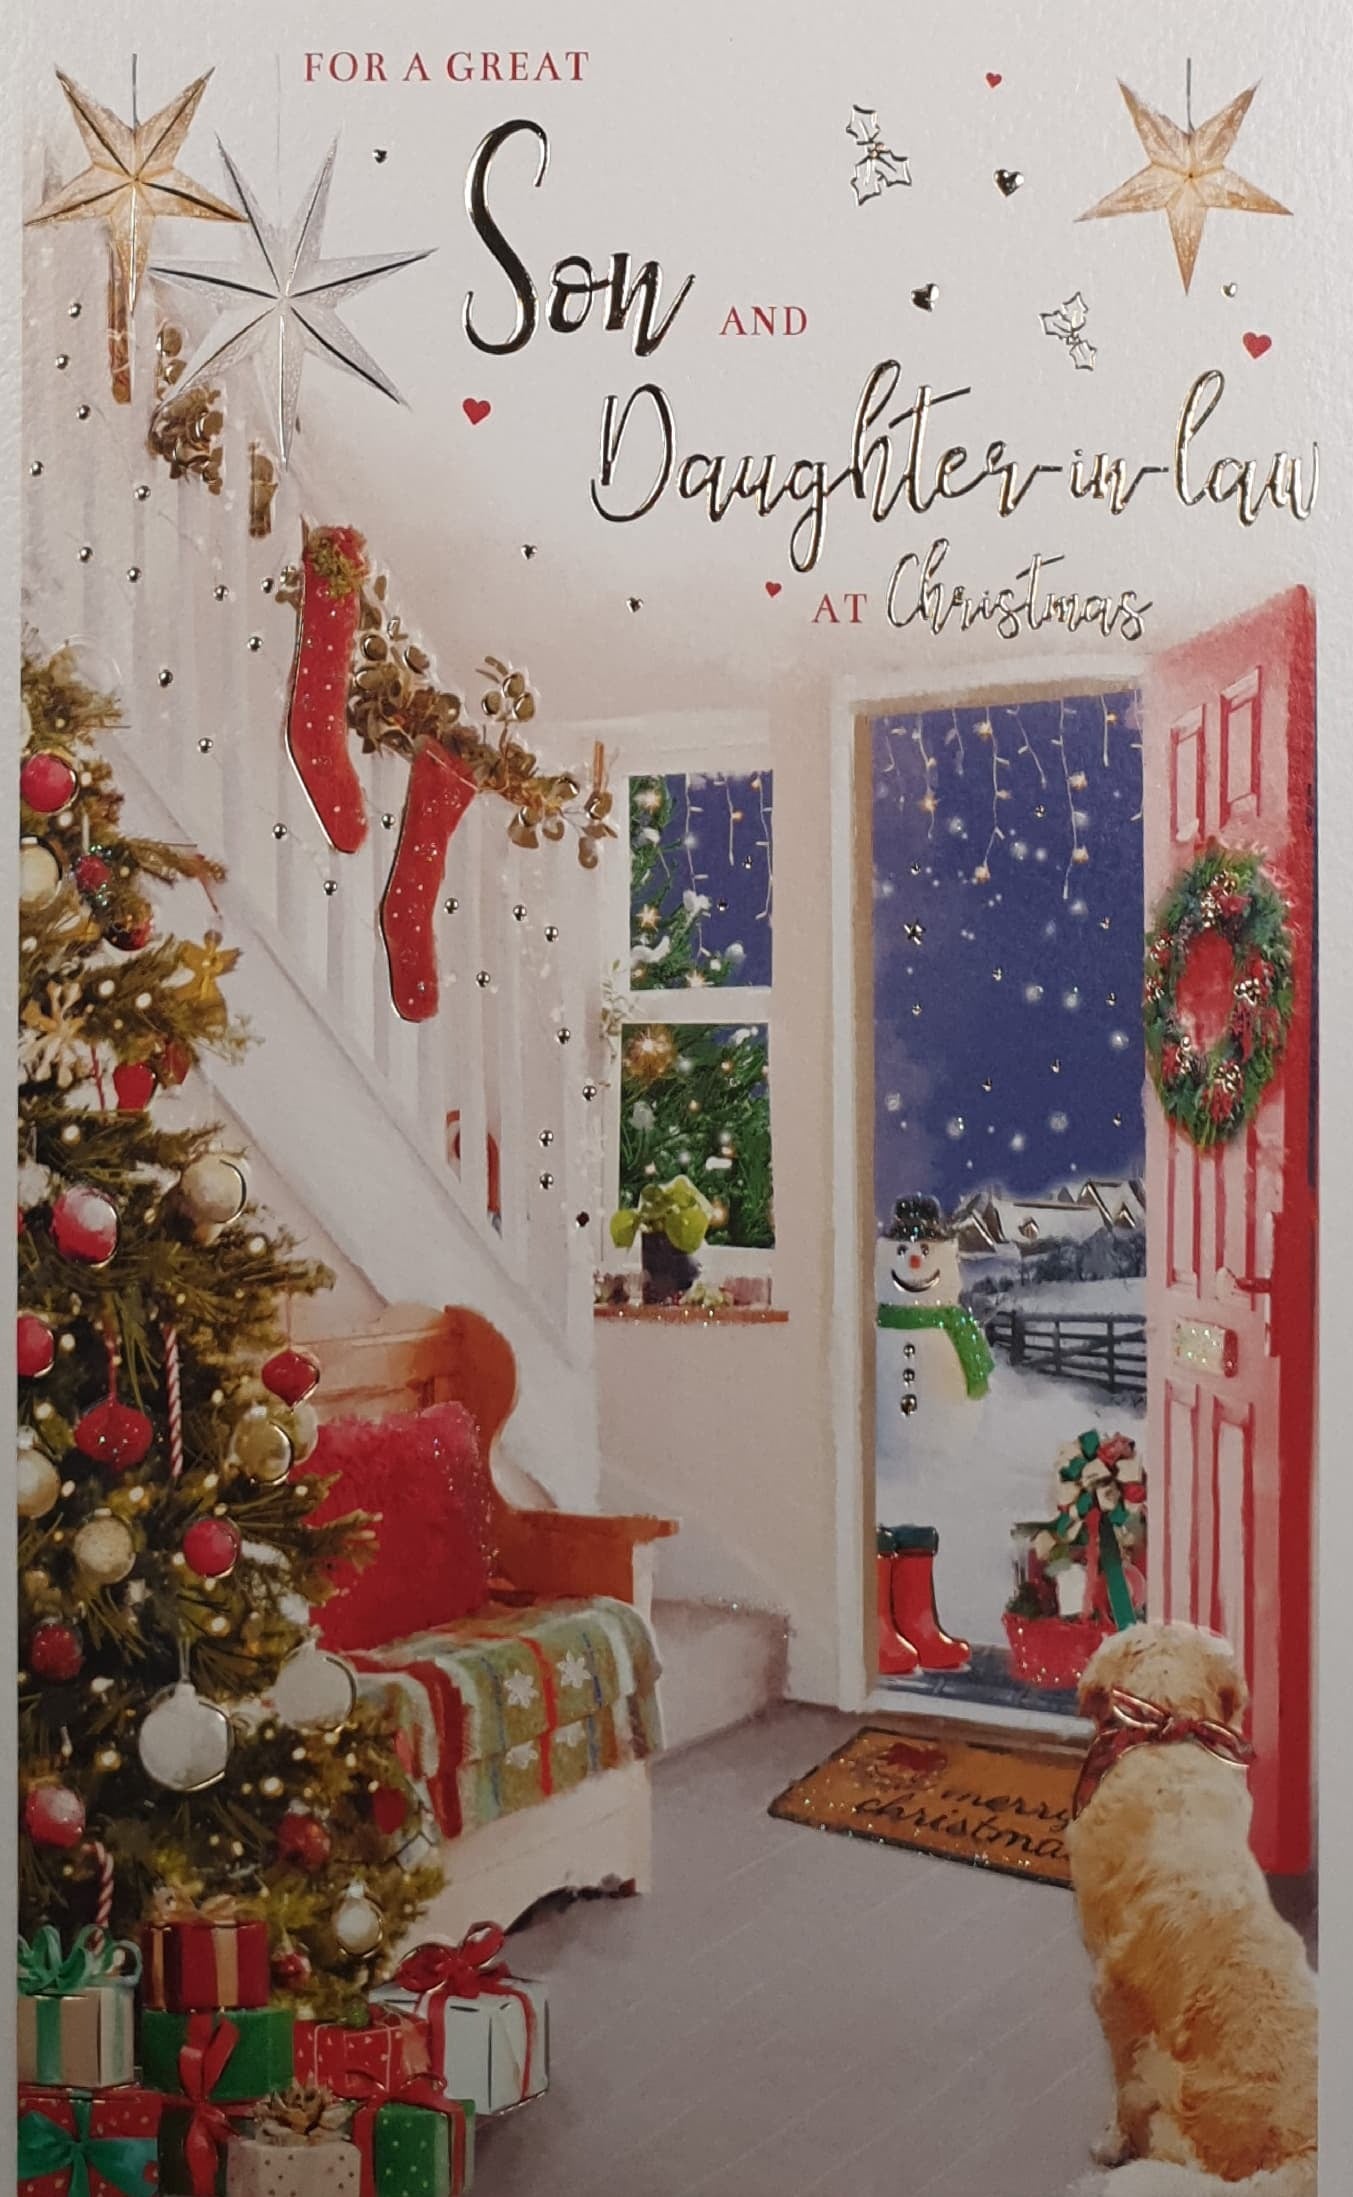 Son & Daughter-in-Law Christmas Card - Golden Retriever & Decorated Hallway